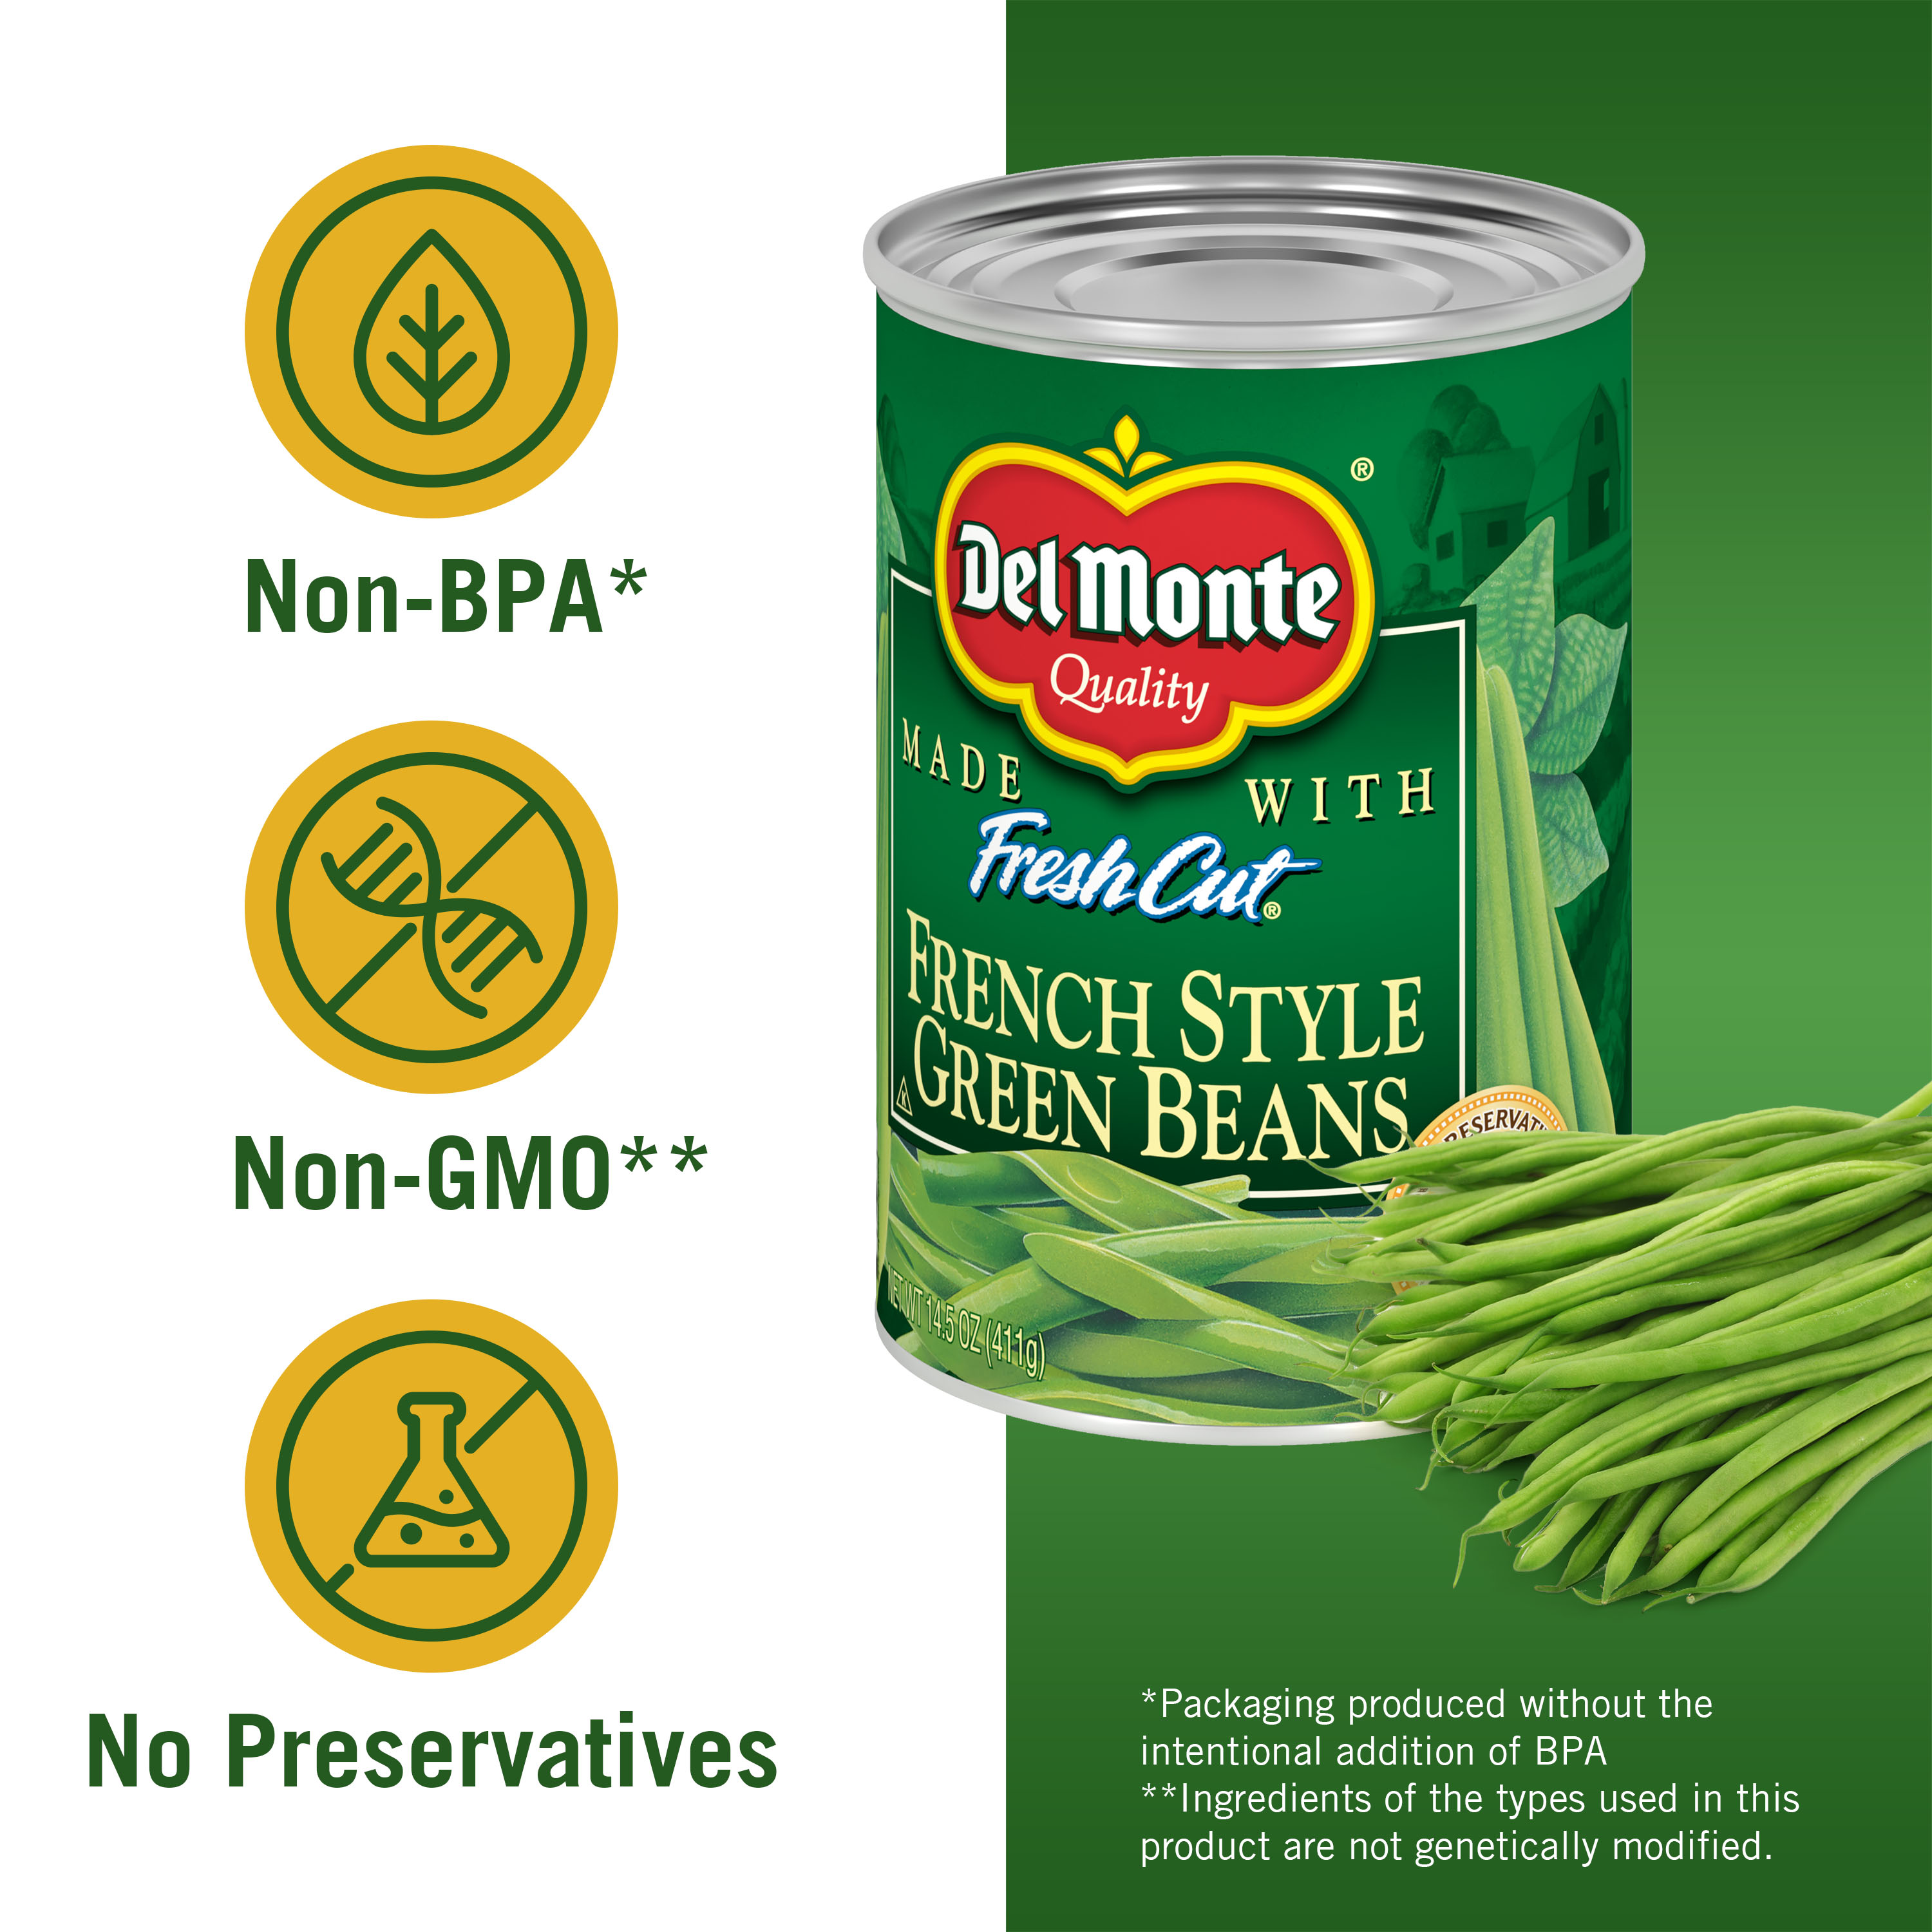 (4 Cans) Del Monte French Style Green Beans, 14.5 oz Can - image 4 of 7